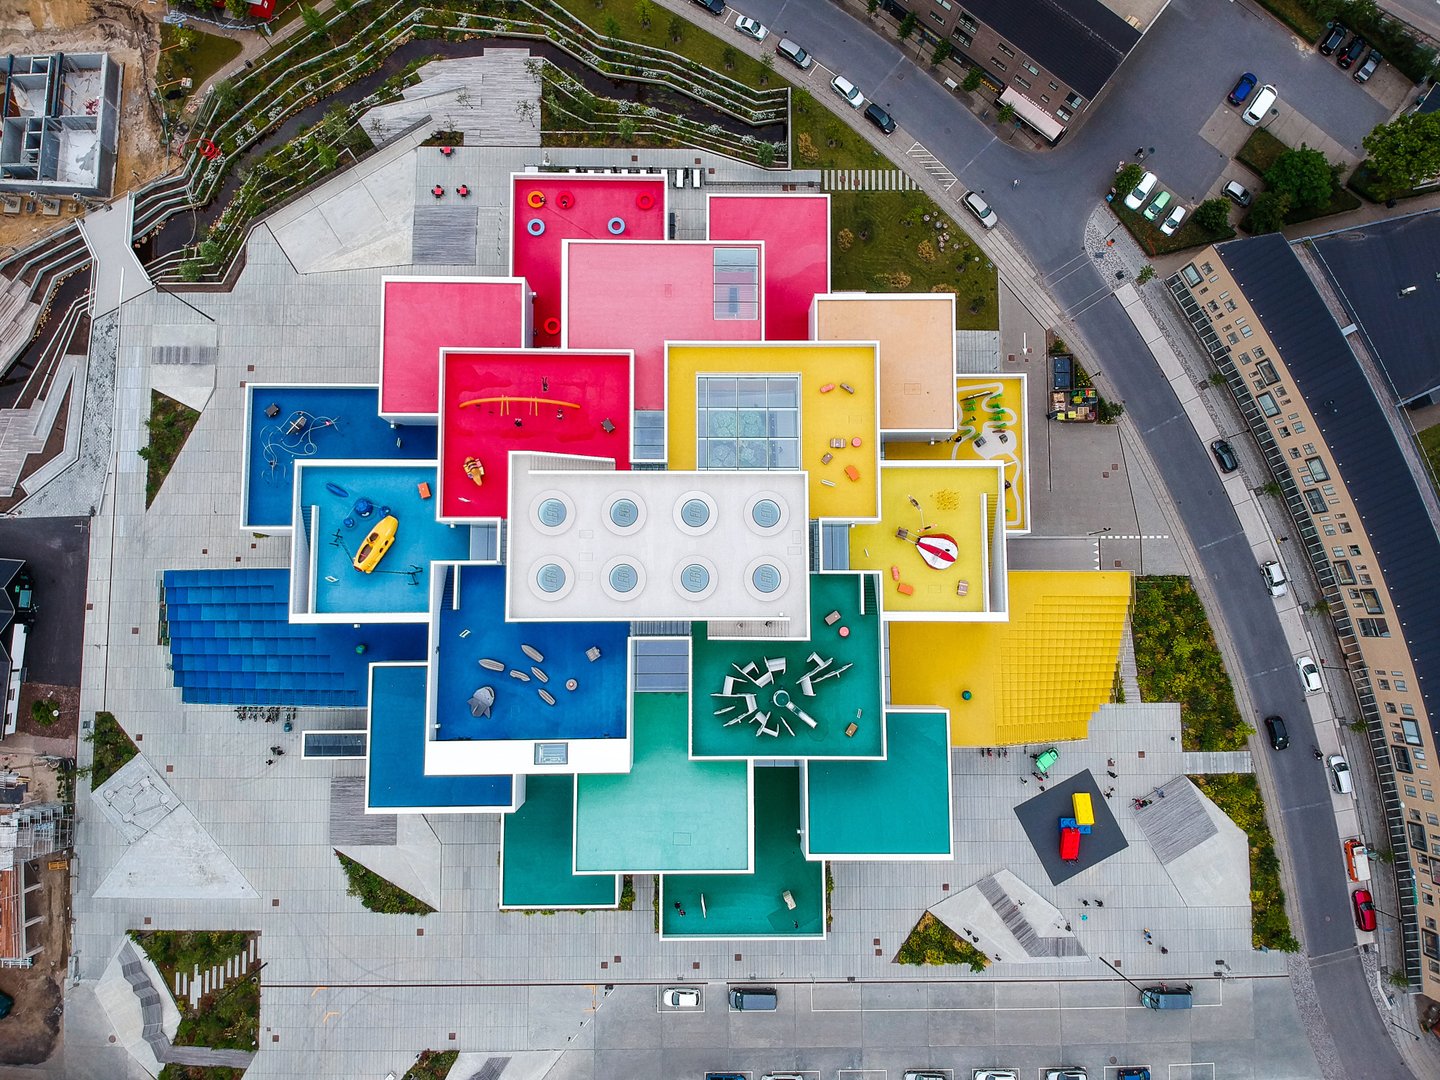 Learn all LEGO® and the LEGO House in Denmark